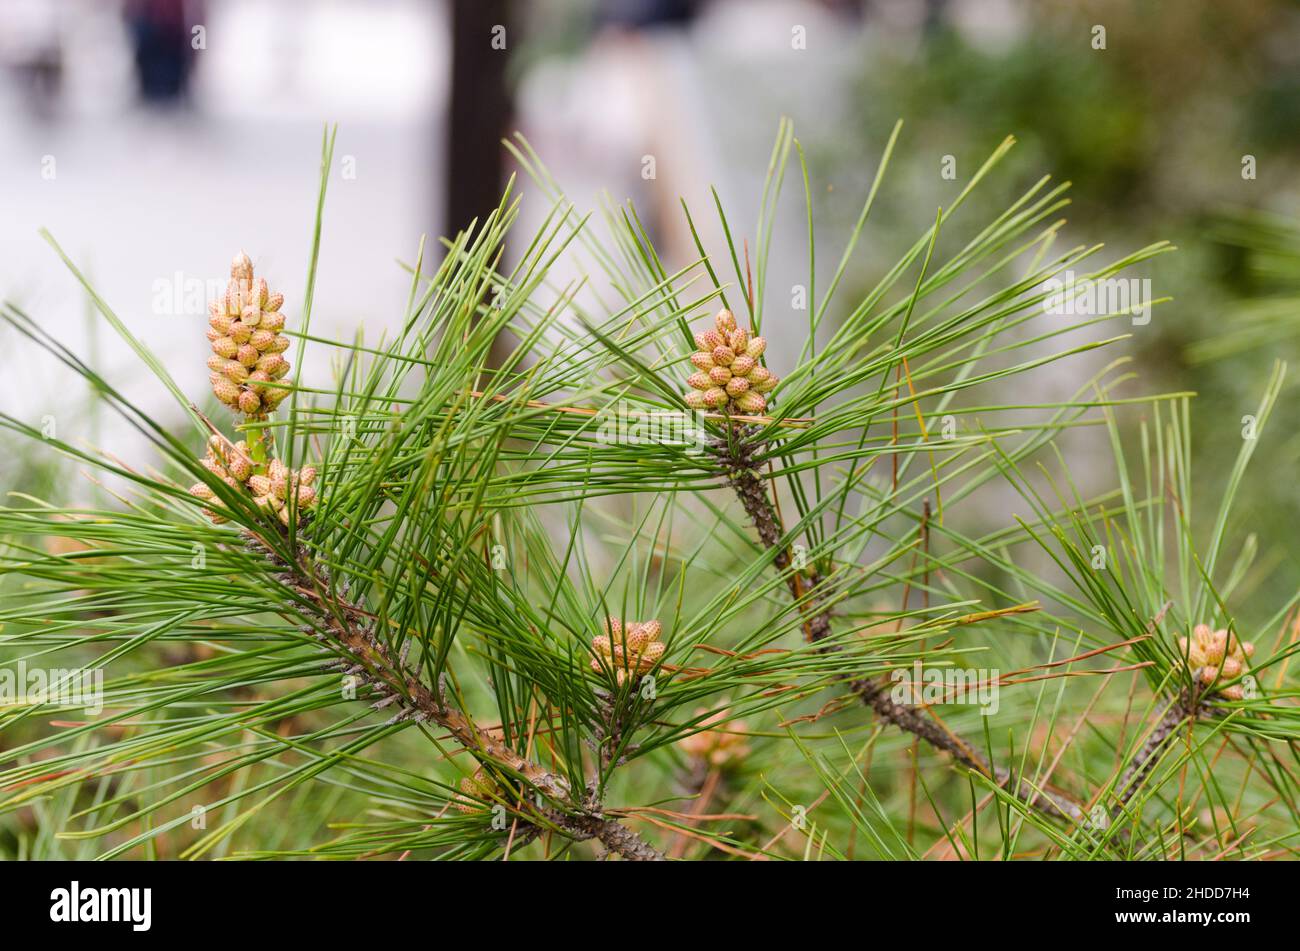 Details of the branches of a pine tree in the gardens of Ise Jingu Shrine, Ise, Japan Stock Photo